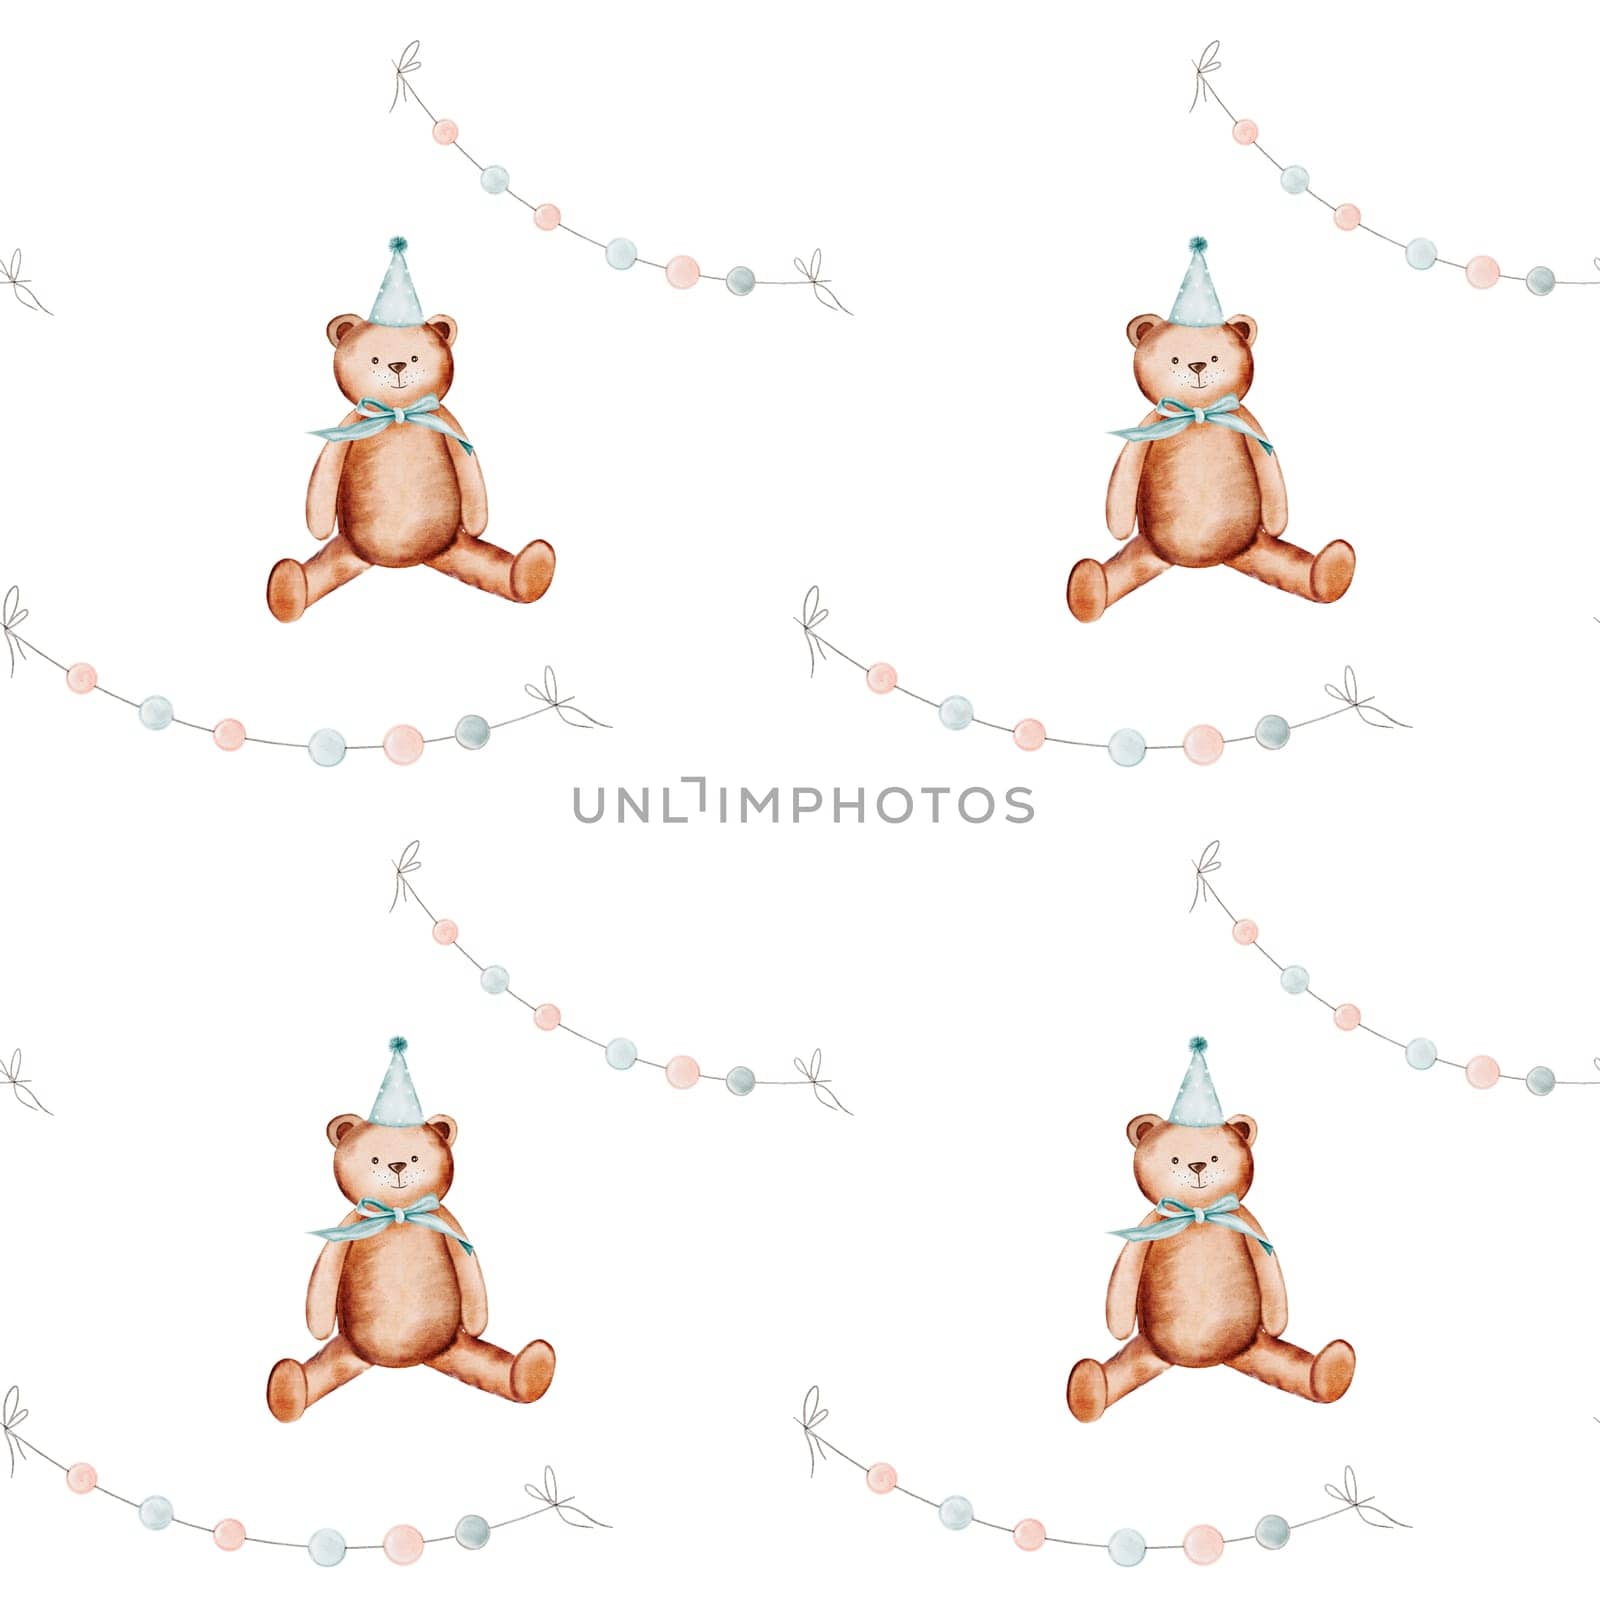 Teddy bear toy pattern. Watercolor seamless illustration hand drawing. Drawing of a cute animal with a festive garland. Ideal for diapers, wrapping paper, baby shower decorations and textiles